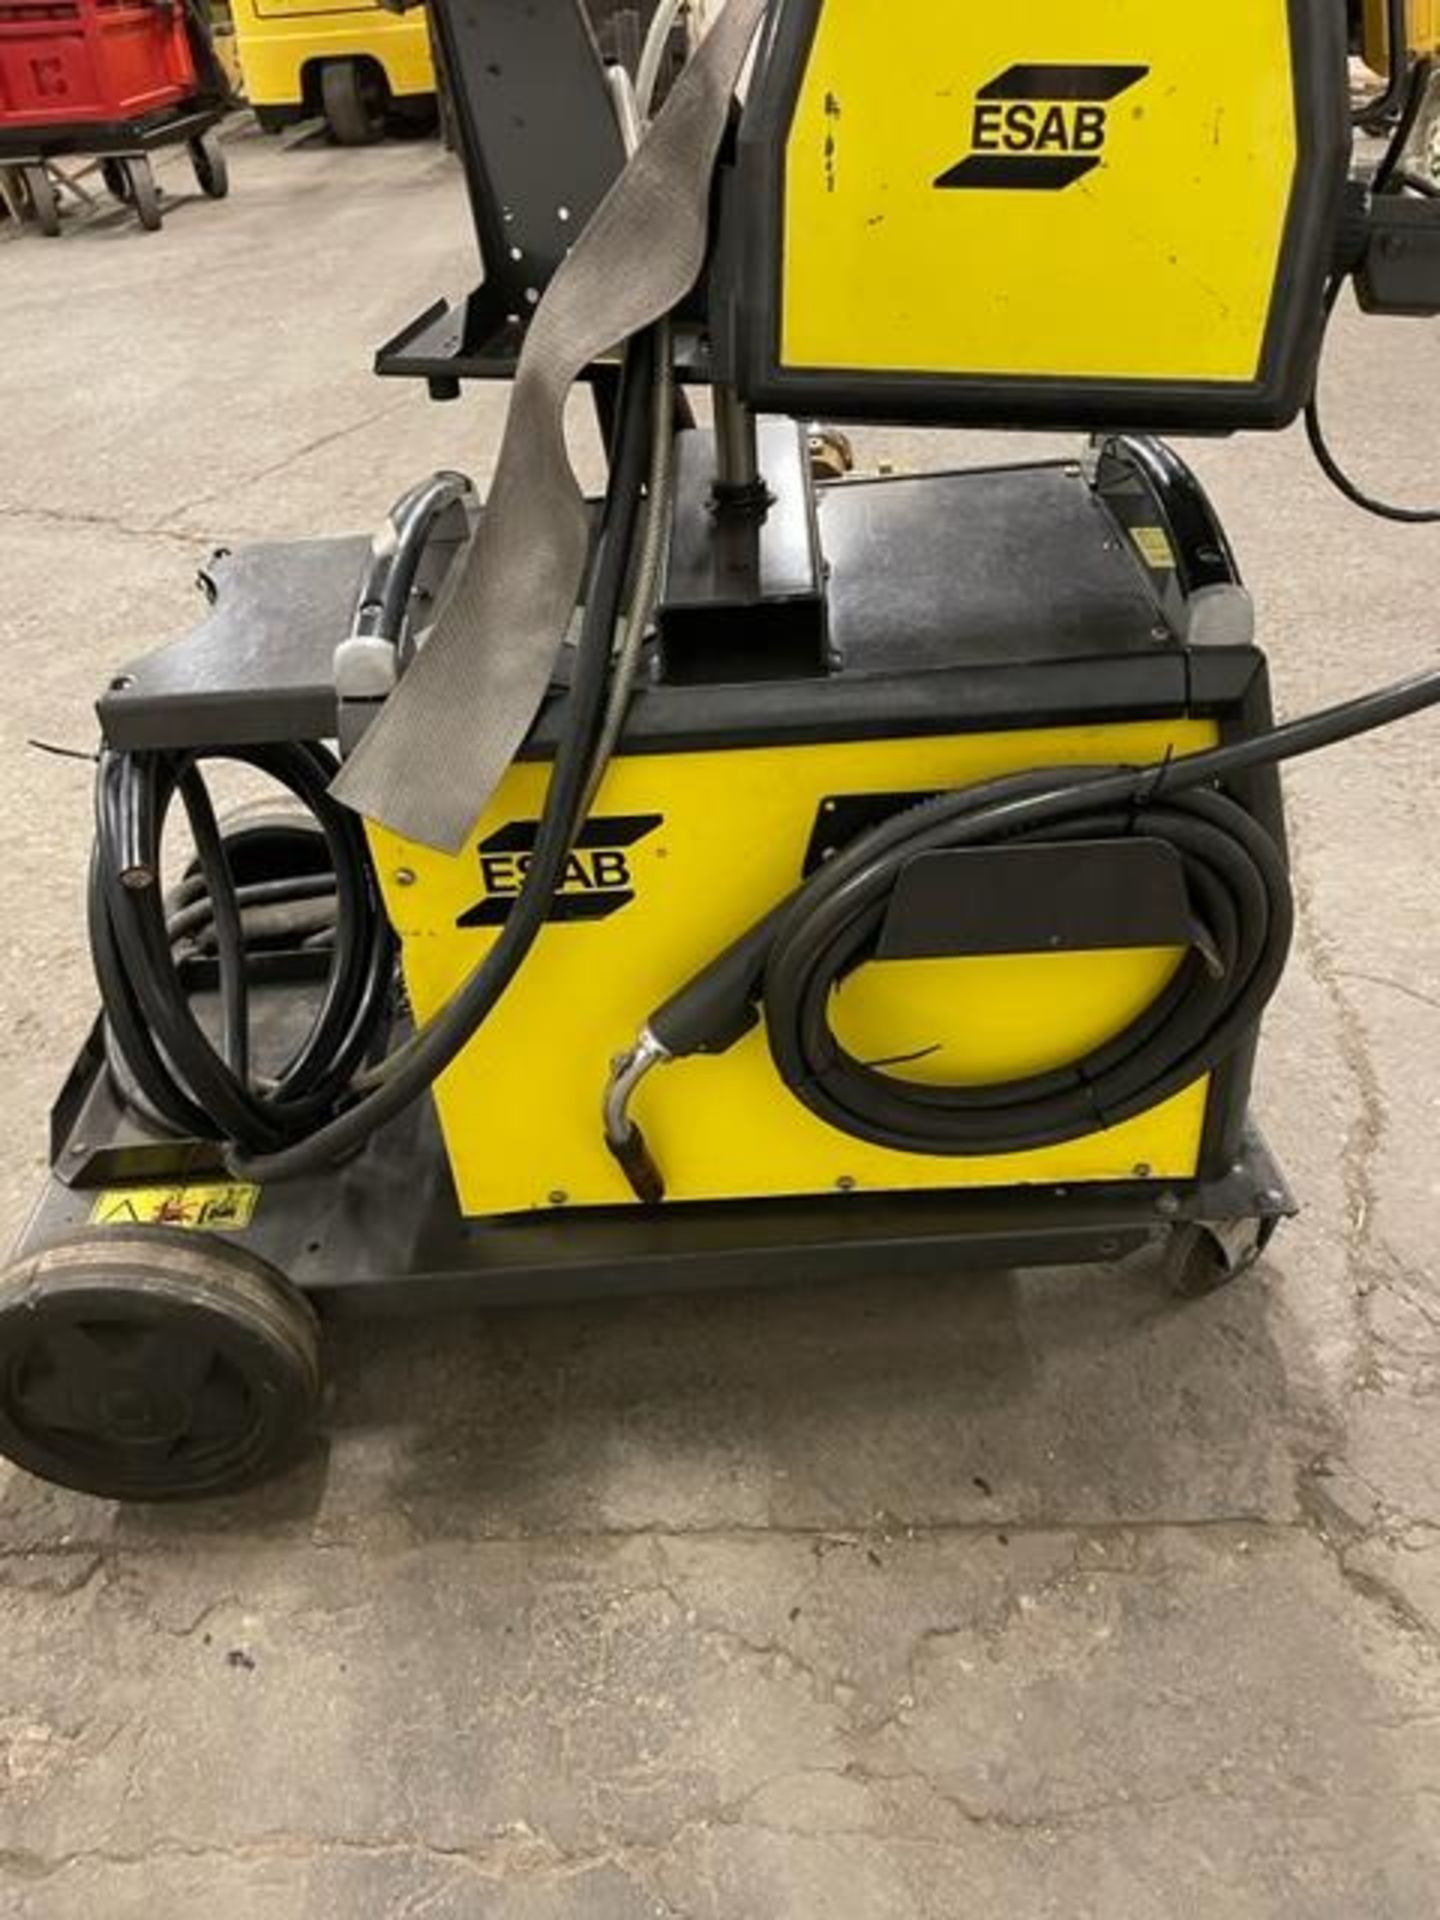 Esab AristoMig 500 Mig Welder Complete with Wire Feeder and Mig gun - 500 amp unit with remote - Image 3 of 3